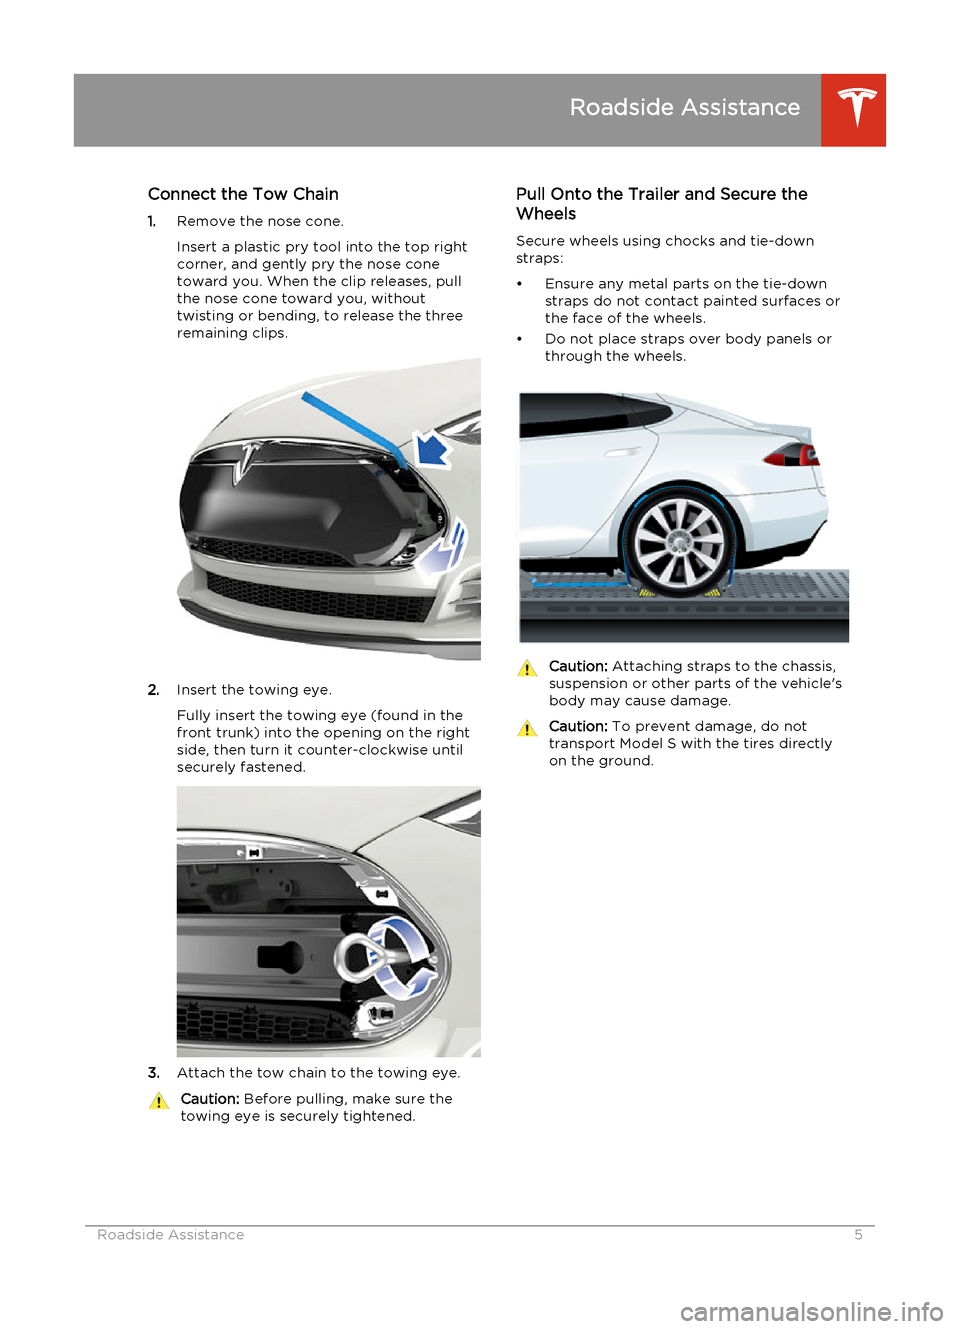 TESLA MODEL S 2014  Quick Guide (Europe) Connect the Tow Chain
1. Remove the nose cone.
Insert a plastic pry tool into the top right
corner, and gently pry the nose cone toward you. When the clip releases, pull
the nose cone toward you, with